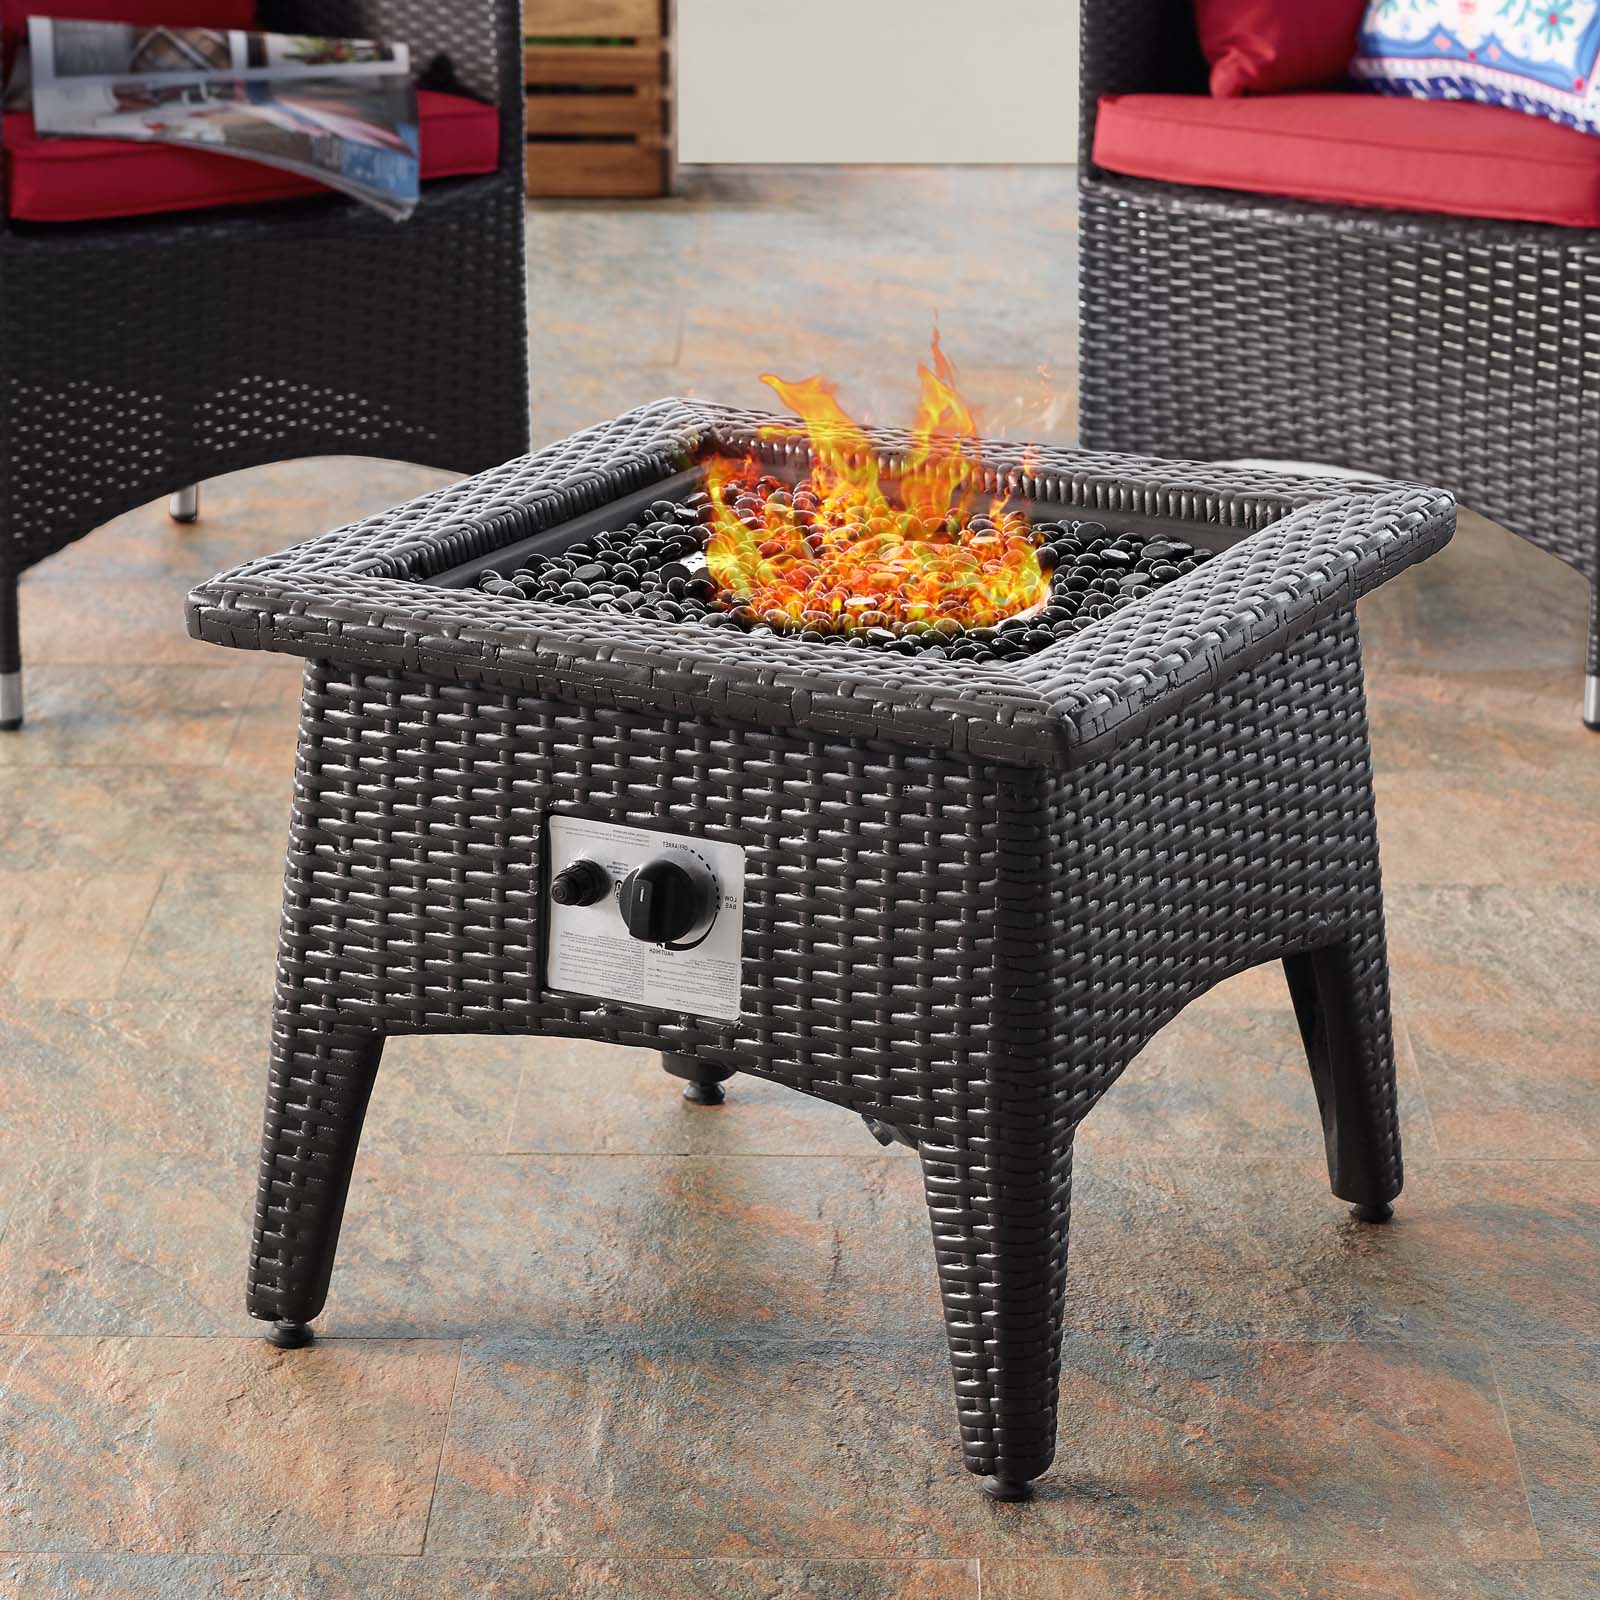 Contemporary Modern Urban Designer Outdoor Patio Balcony Garden Furniture Lounge Coffee Fire Pit Table and Chair Set, Fabric Rattan Wicker, Red - image 2 of 8